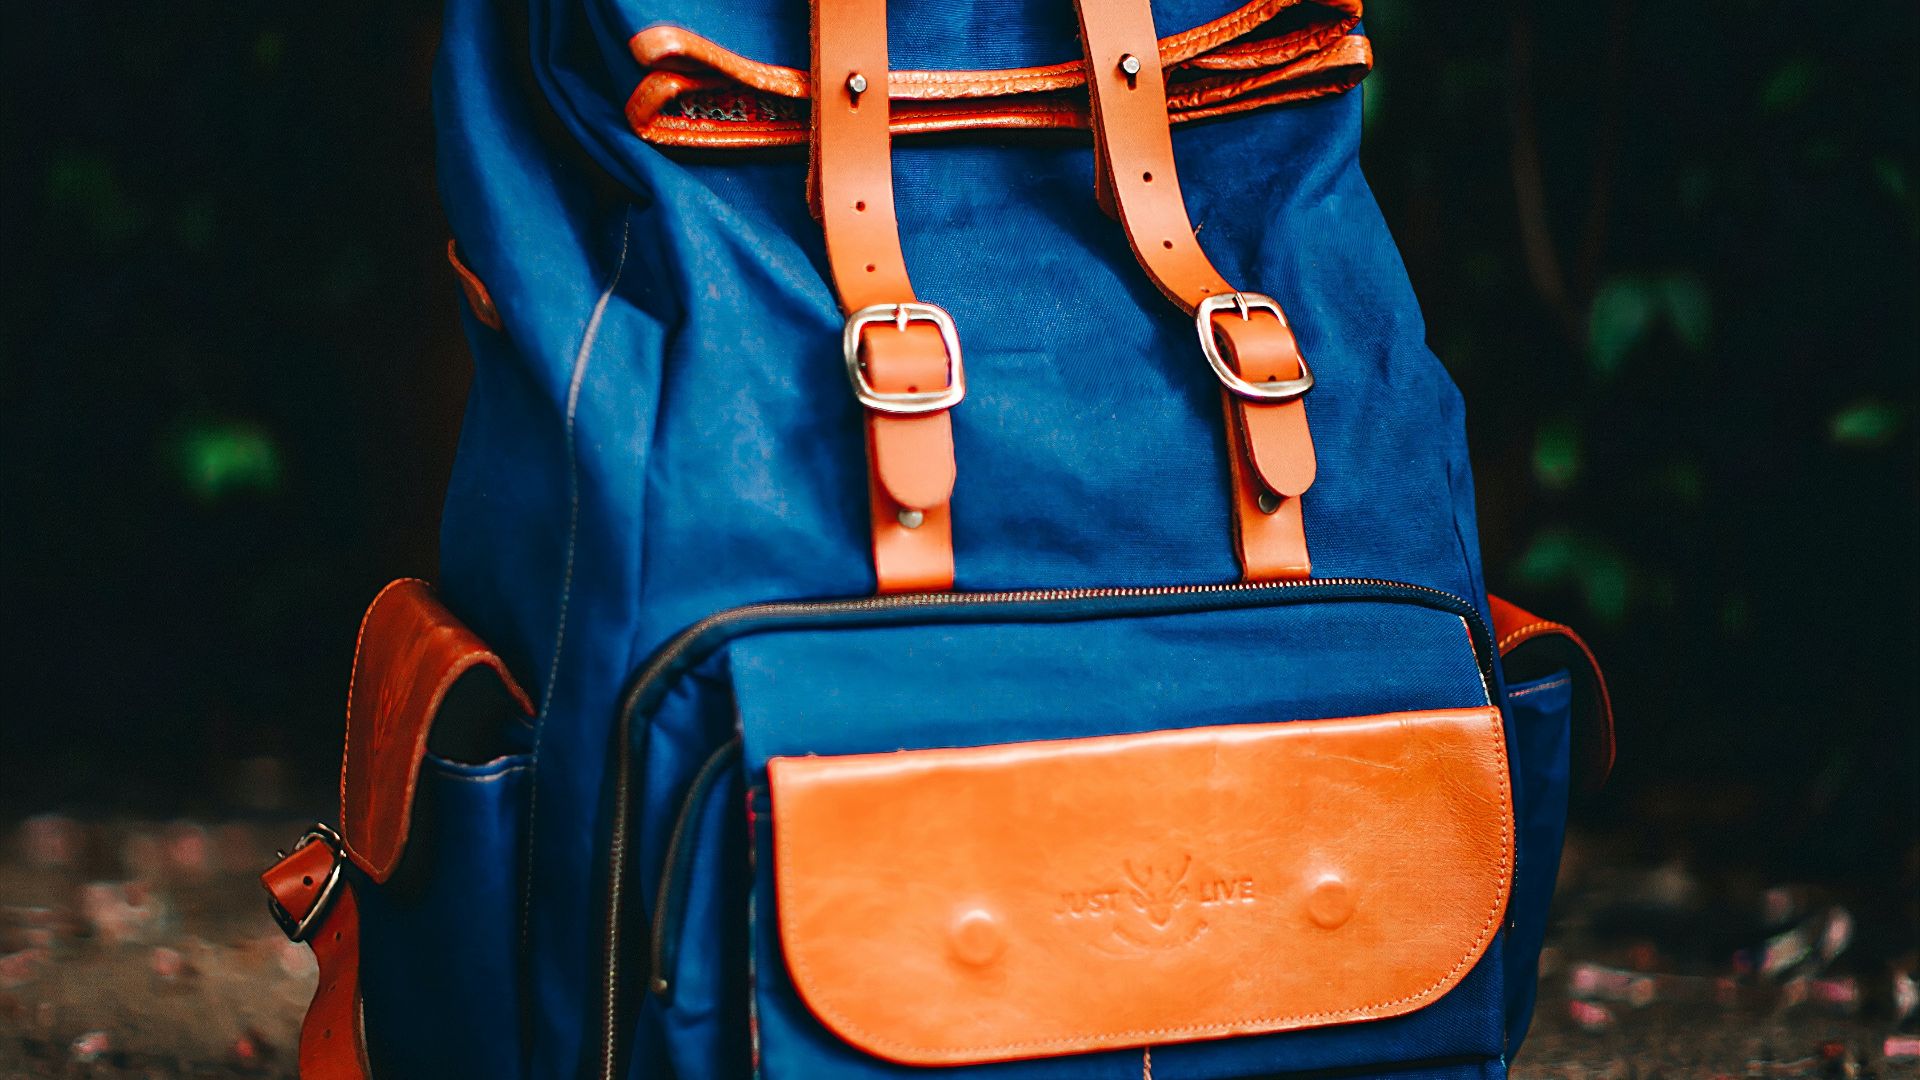 Blue rucksack with brown straps